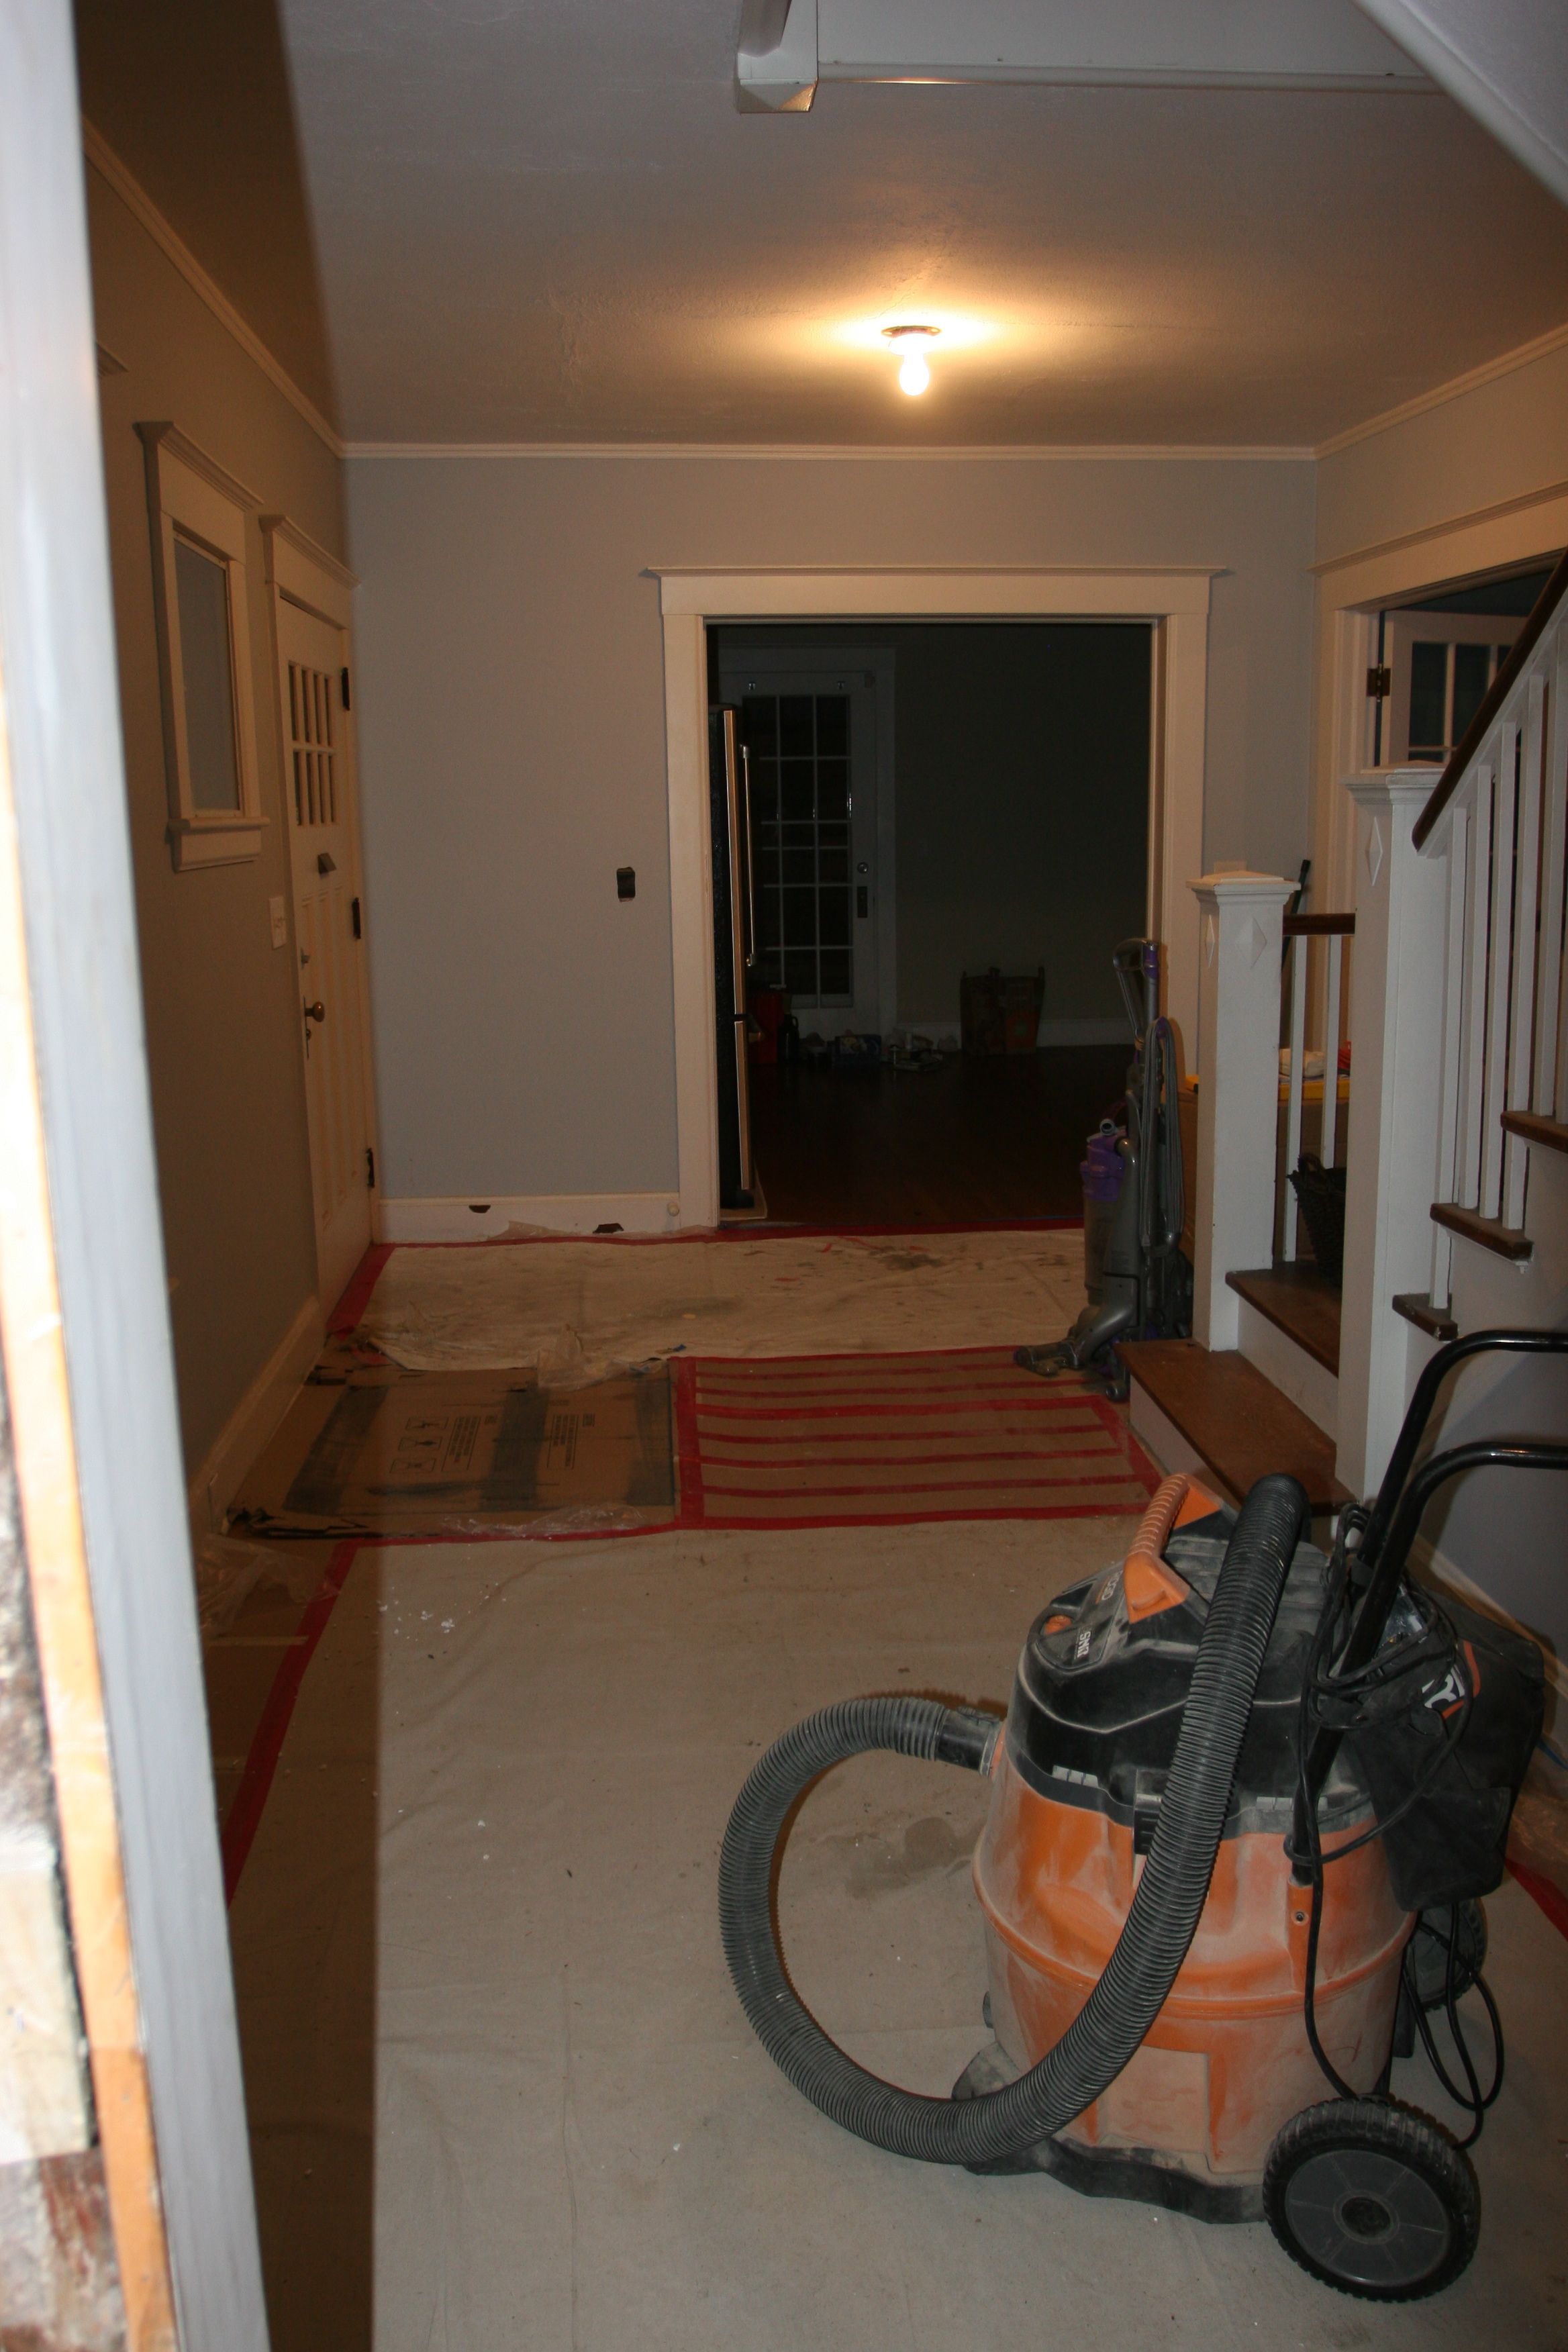 The foyer, empty but for a few mostly empty boxes, the shop-vac and some cardboard.